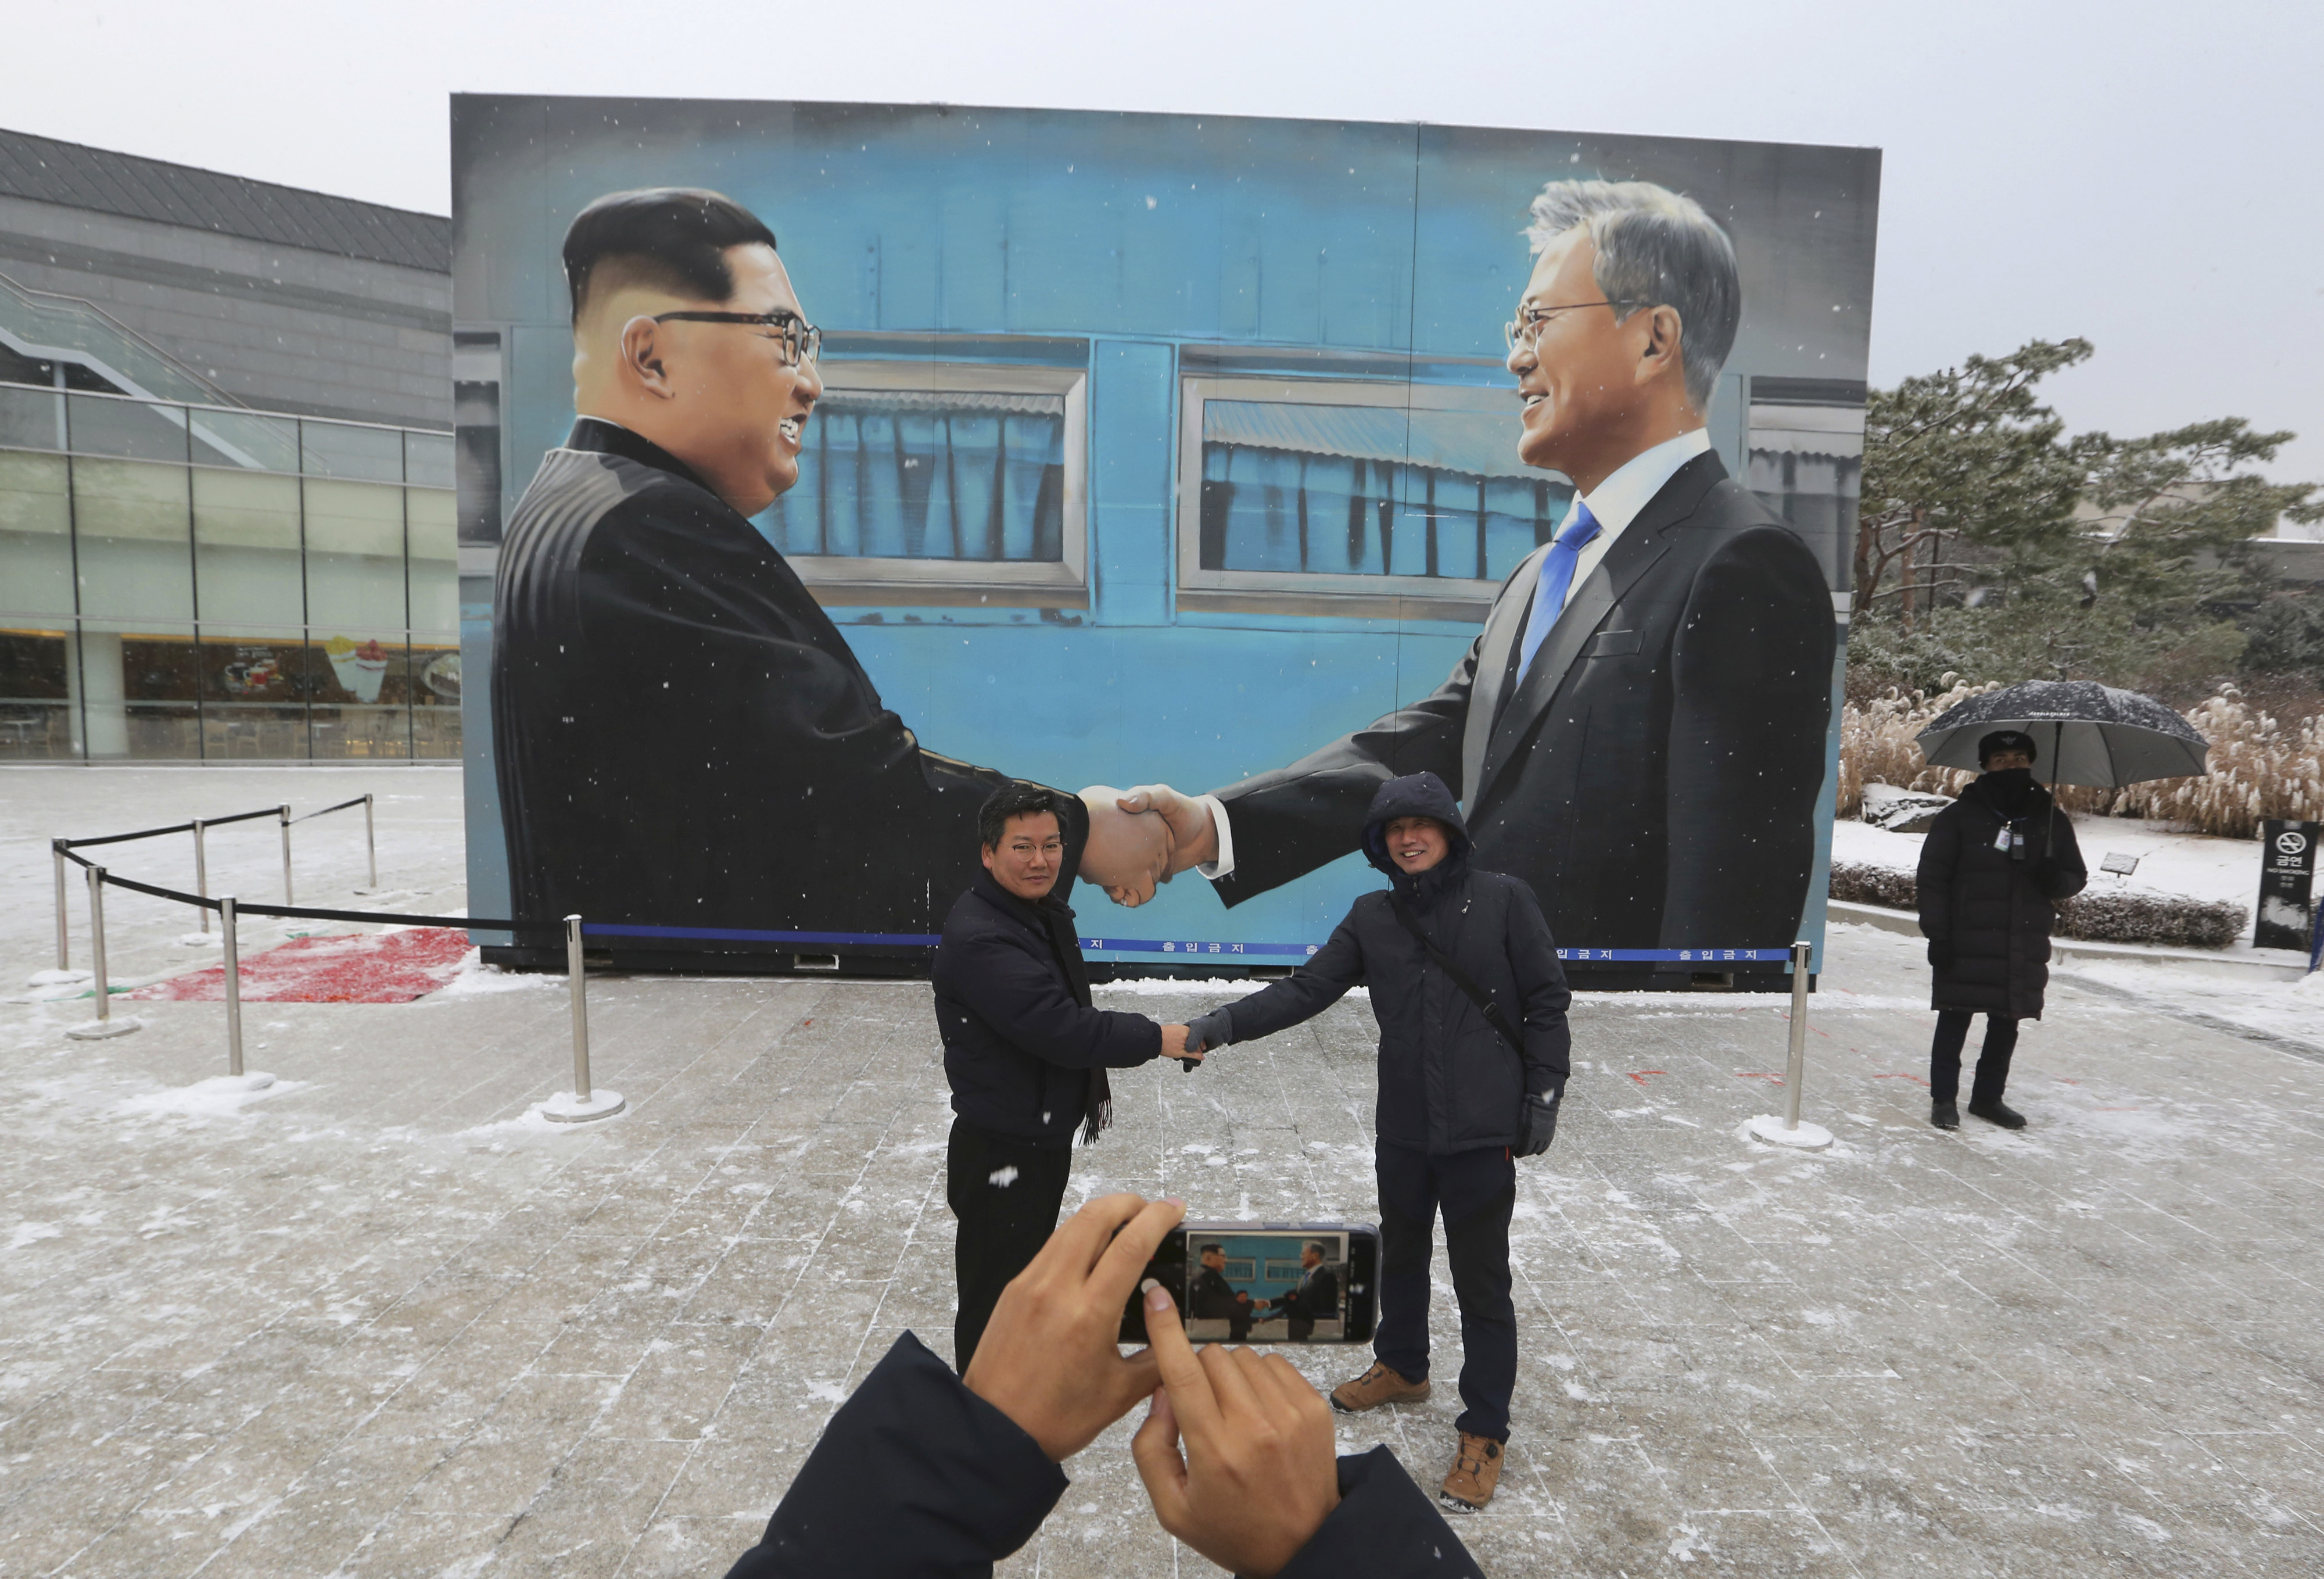 Two men pose with an image of North Korean leader Kim Jong Un, left, and South Korean President Moon Jae-in displayed at a park near the presidential Blue House in Seoul, South Korea, Thursday, Dec. 13, 2018. Kim's return visit to Seoul appears unlikely to take place this month, a senior South Korean official said. (AP Photo/Ahn Young-joon)